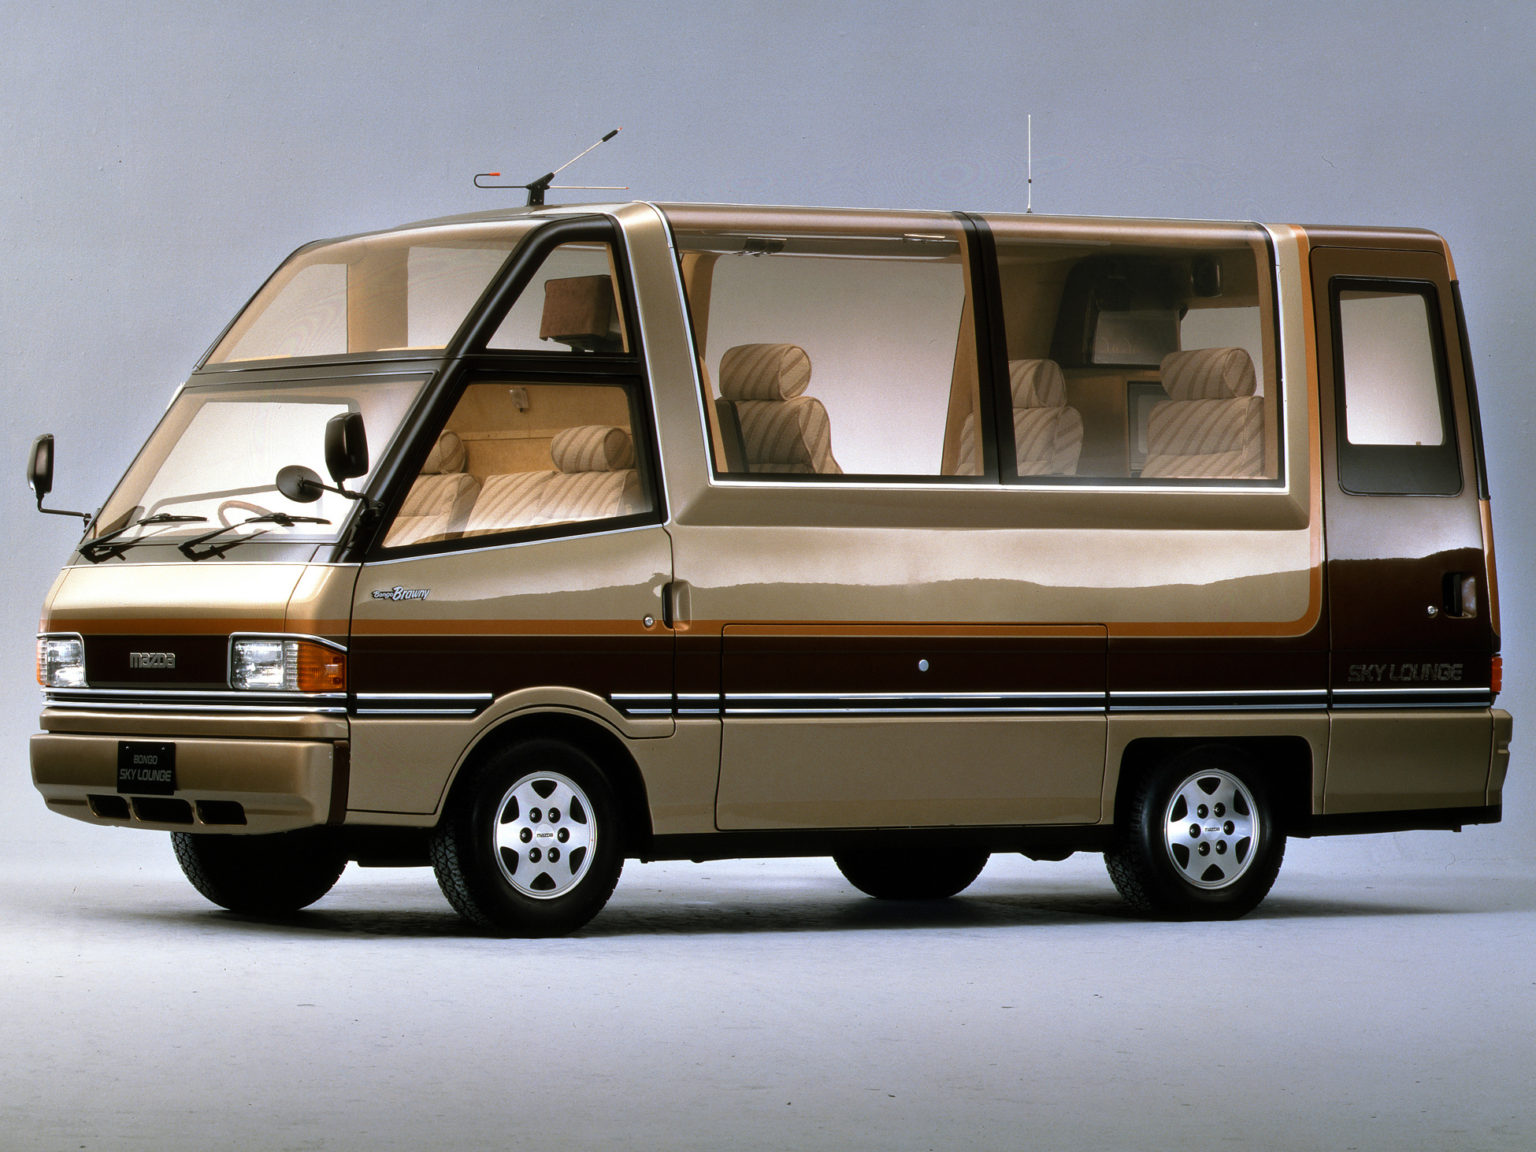 Mazda has made a number of people haulers over the years, including this model, a concept van.